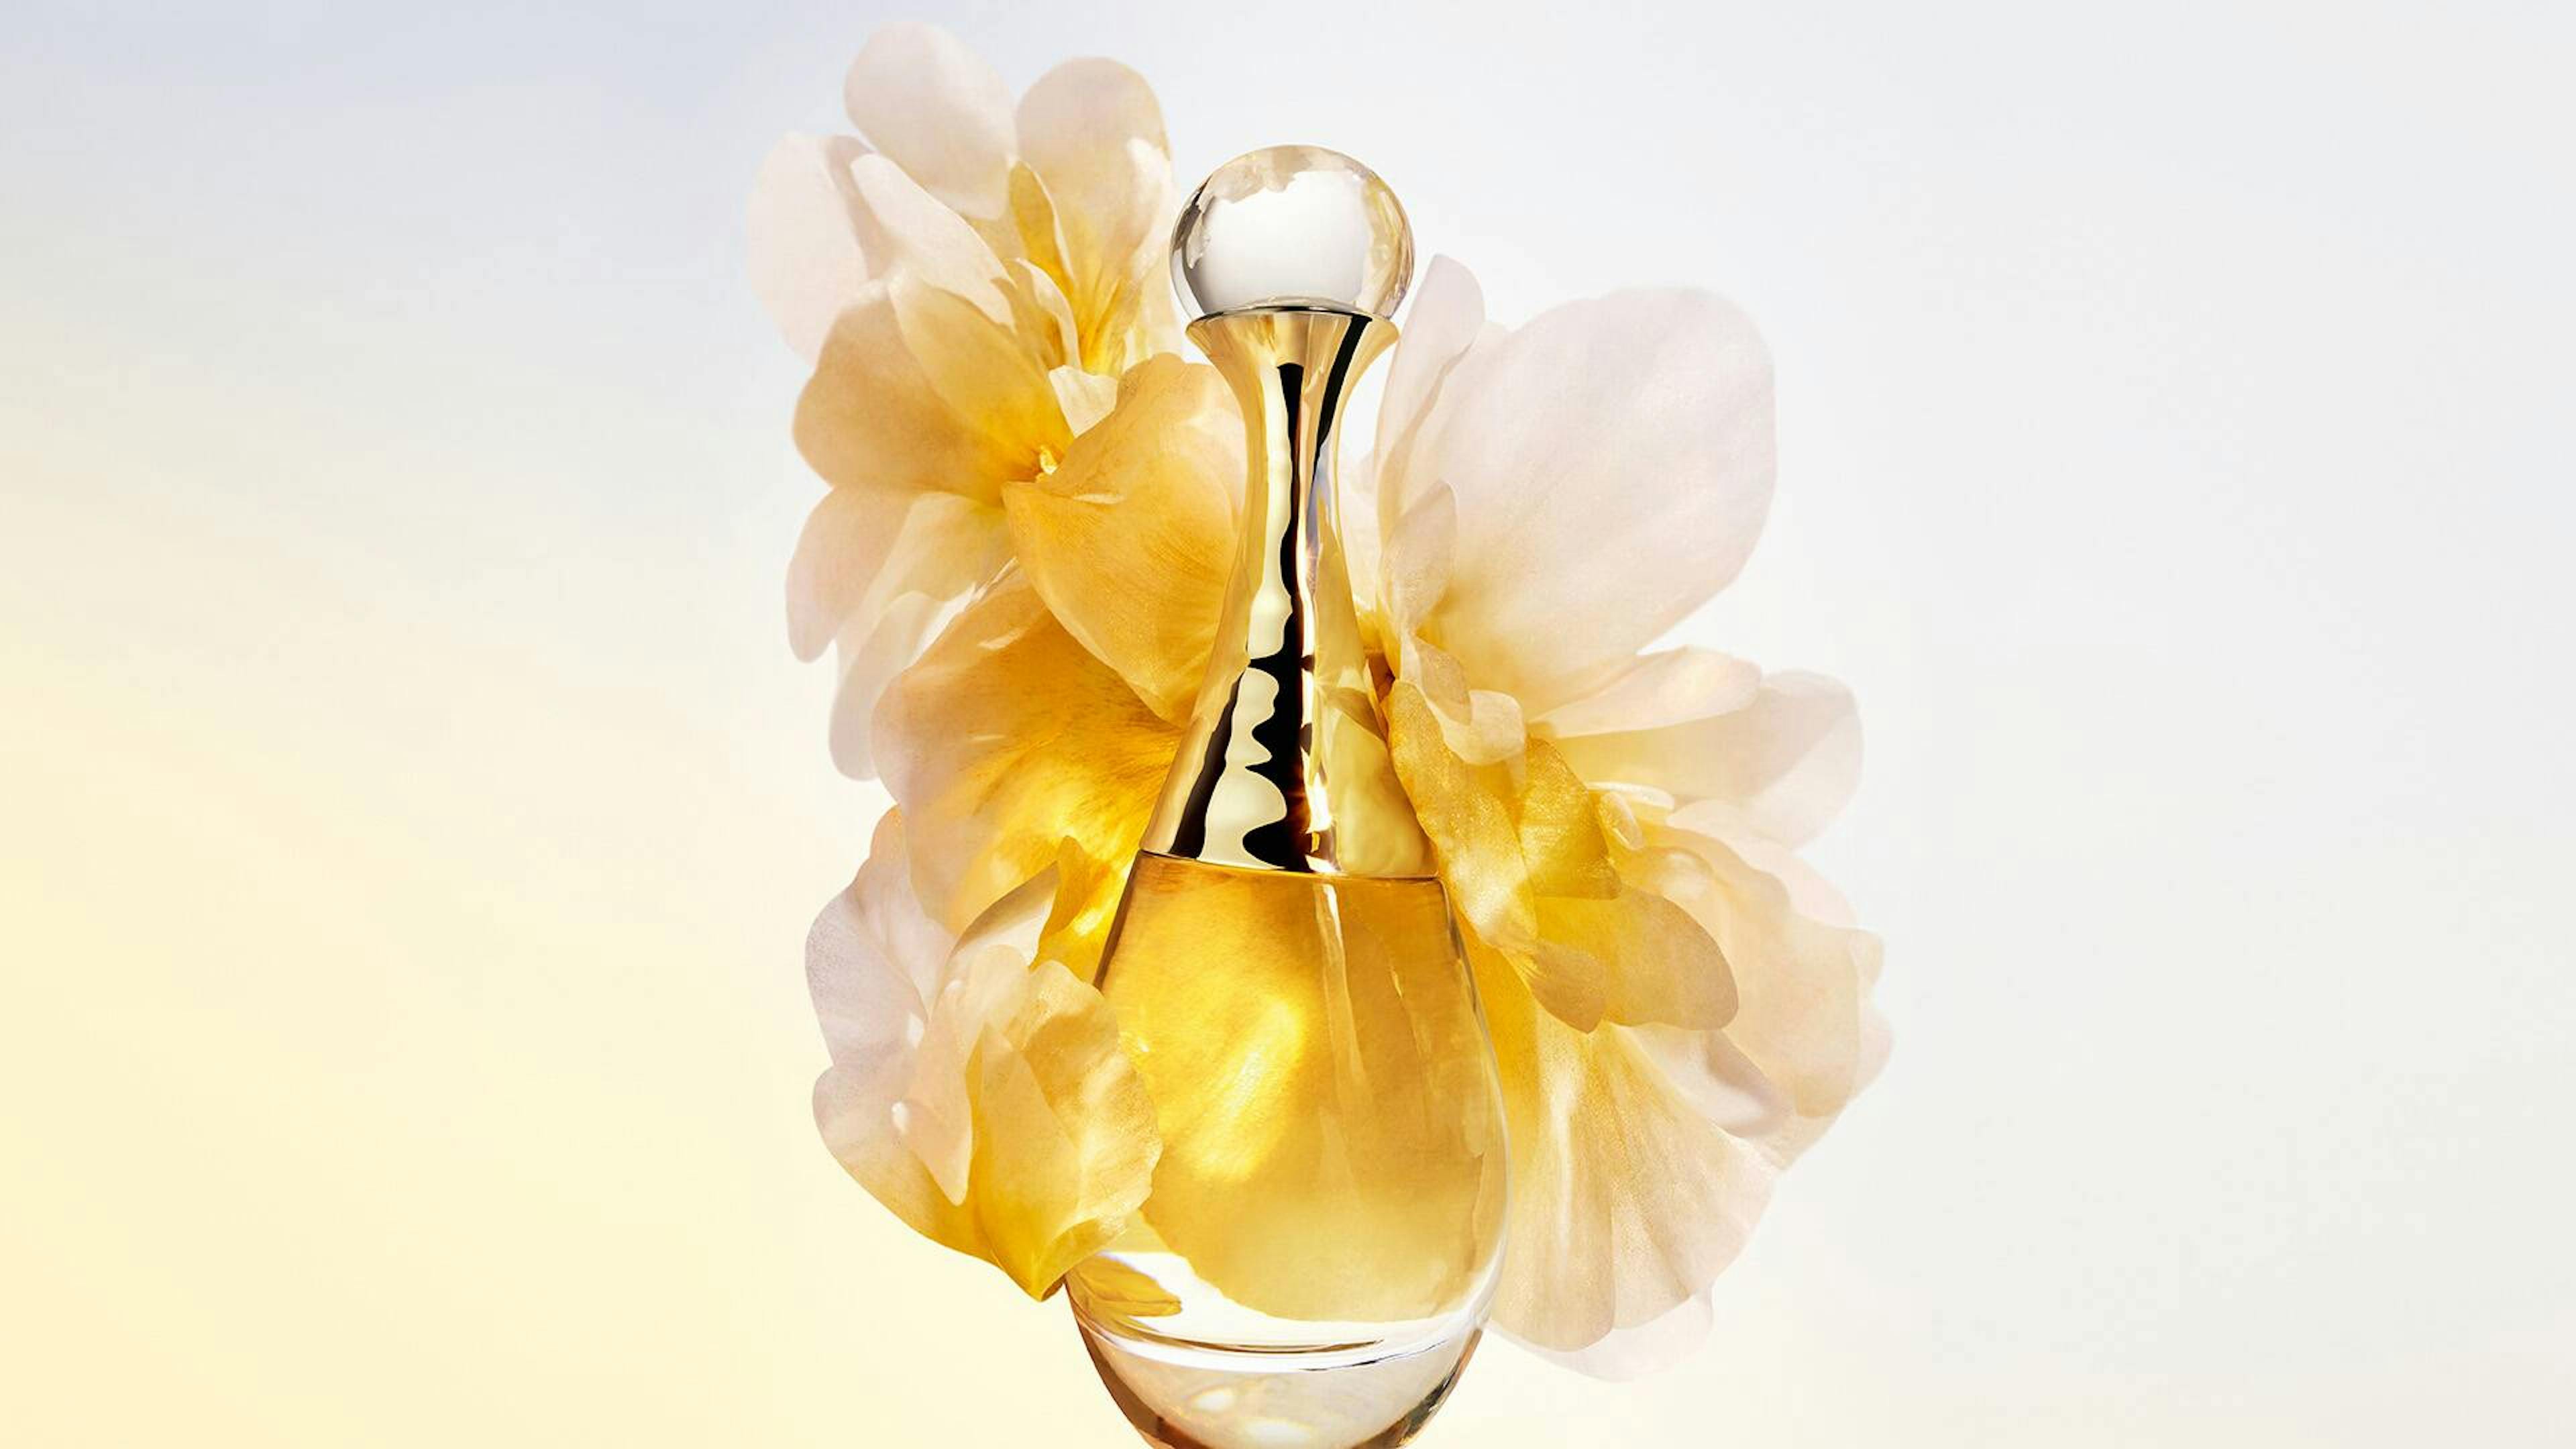 Cover Dior unveils L’Or de J’adore, the new Dior fragrance by Francis Kurkdjian